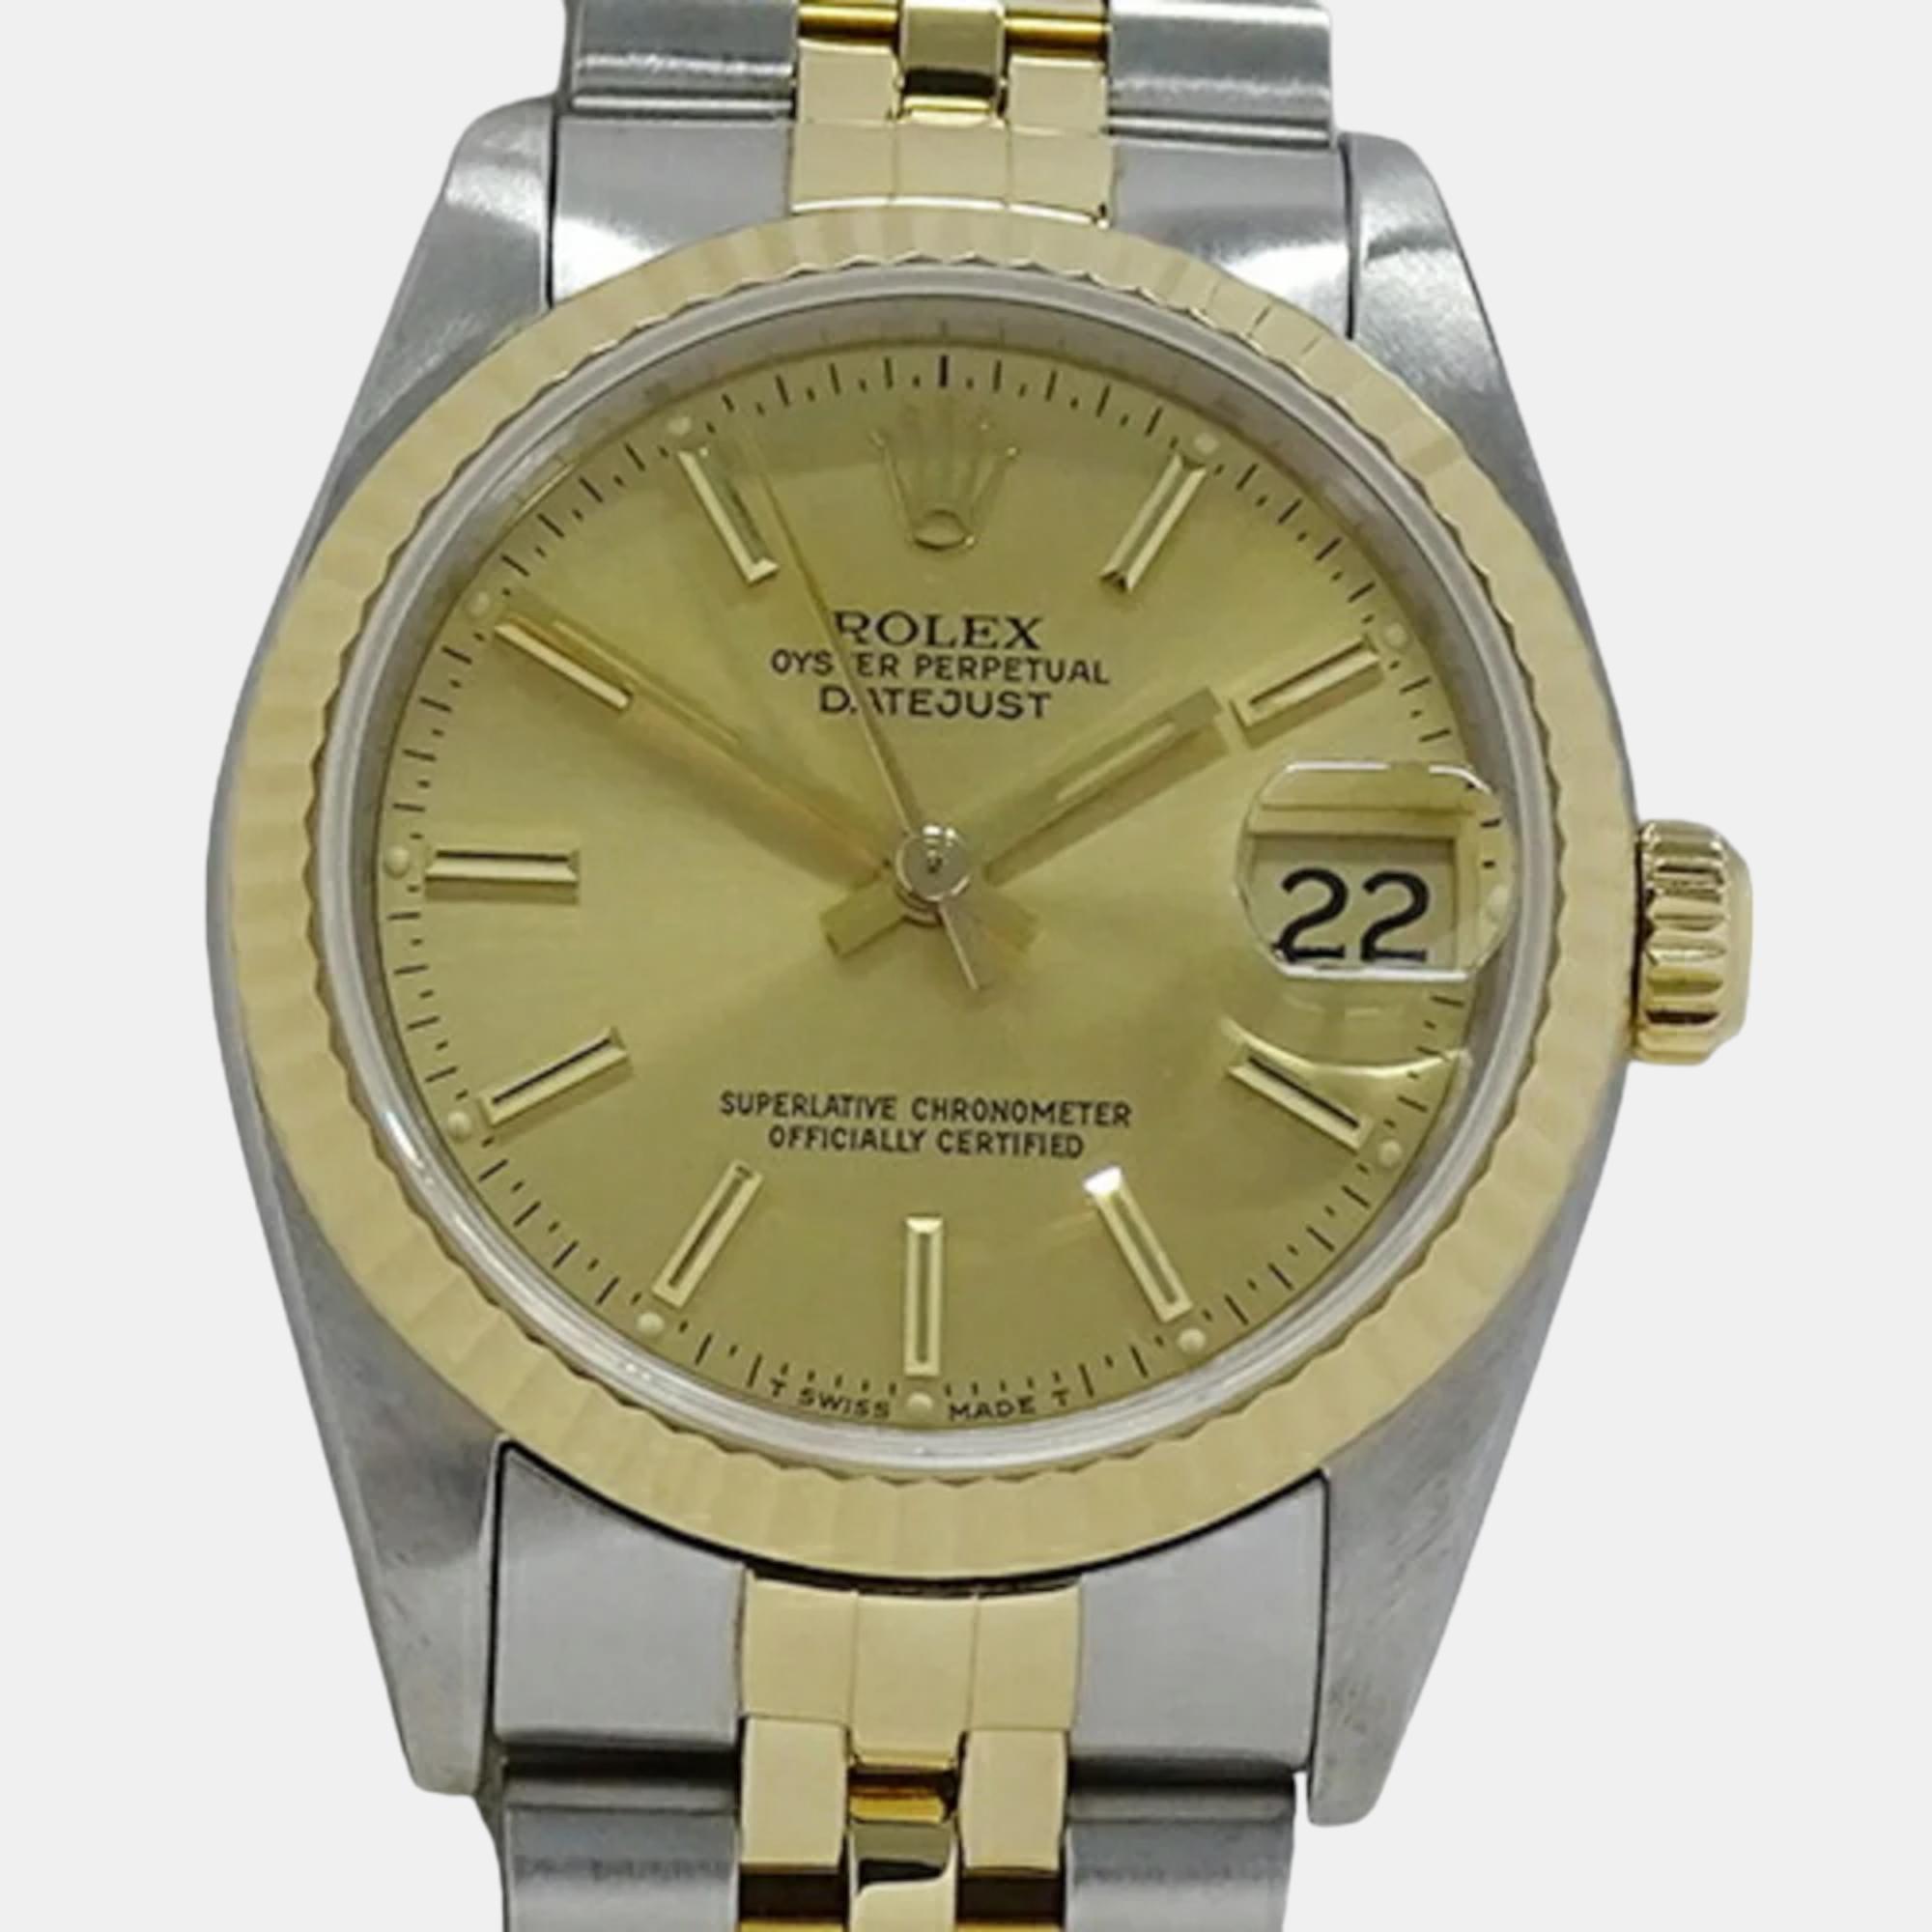 Rolex Chamoagne 18k Yellow Gold And Stainless Steel Datejust 68273 Automatic Men's Wristwatch 31 Mm